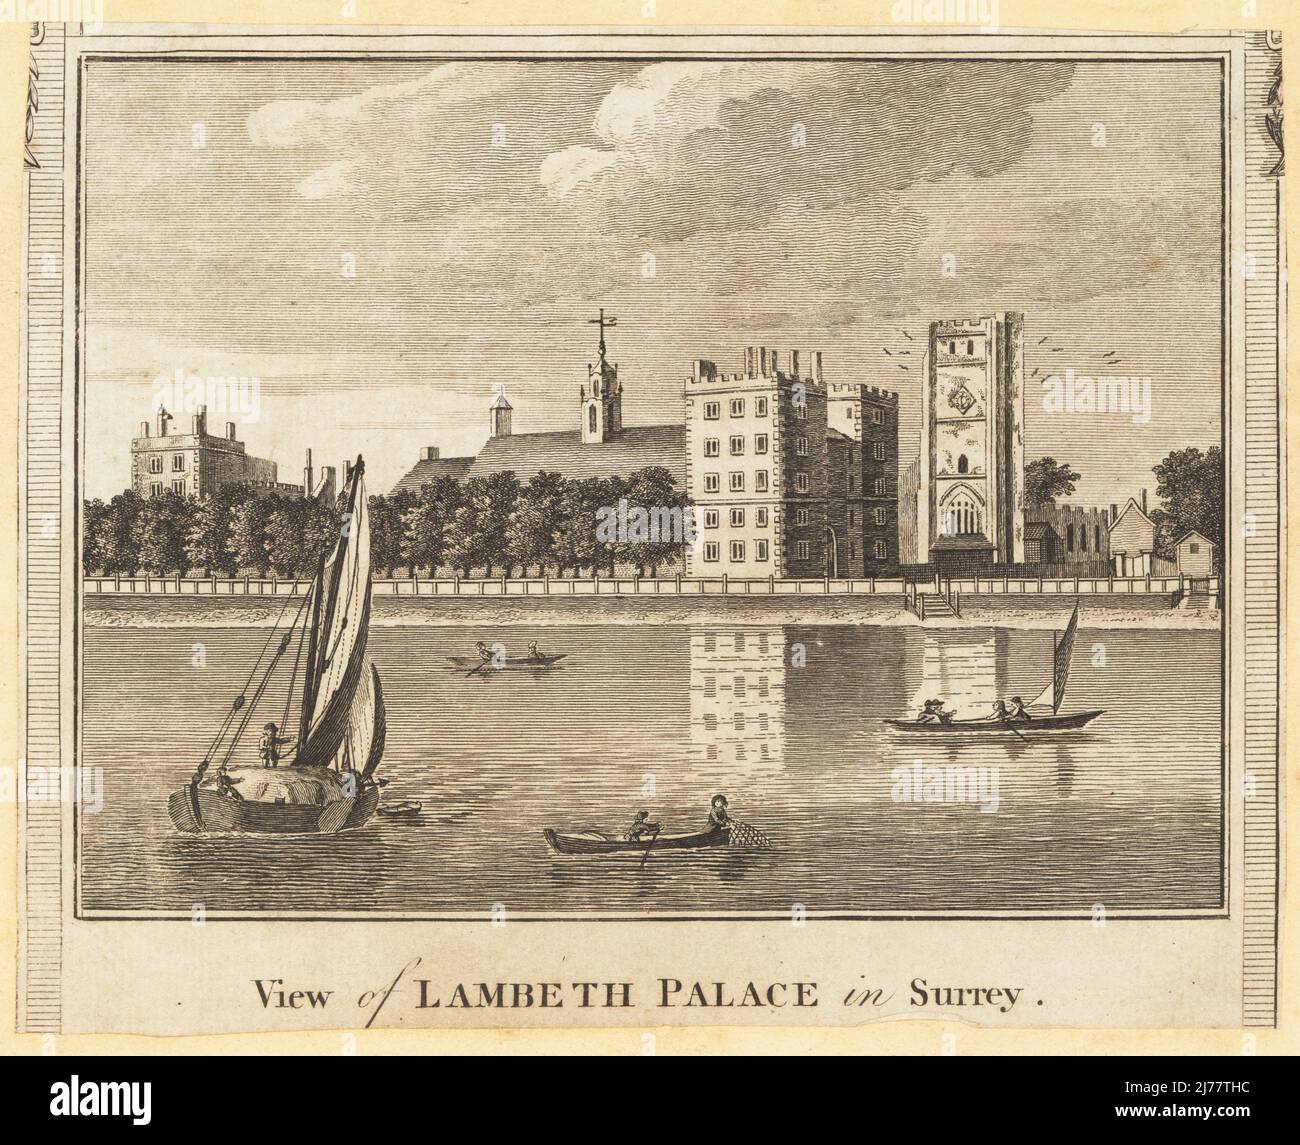 View of Lambeth Palace in Surrey., 18th century. Gothic-revival style residence of the Archbishop of Canterbury. With boats on the River Thames in the foreground. Copperplate engraving by John Taylor from William Thornton’s New History and Survey of London, published by Alexander Hogg at the King’s Arms, 16 Paternoster Row, London, 1784. Stock Photo